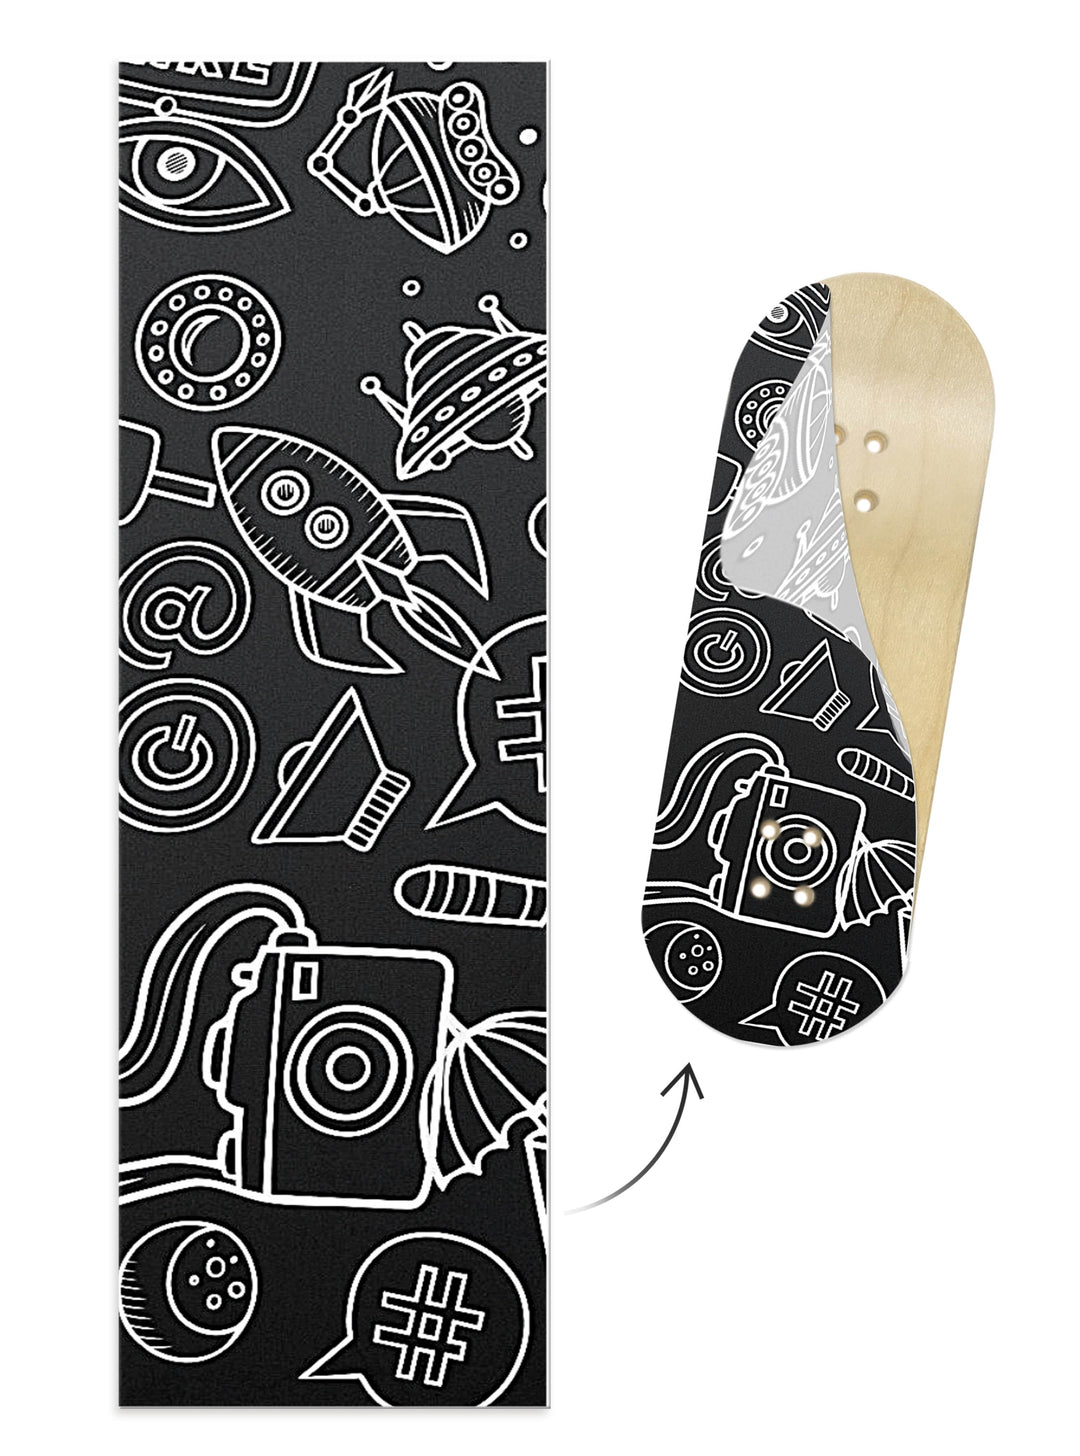 Teak Tuning Limited Edition "Black & White Space Sketch" Deck Graphic Wrap - 35mm x 110mm